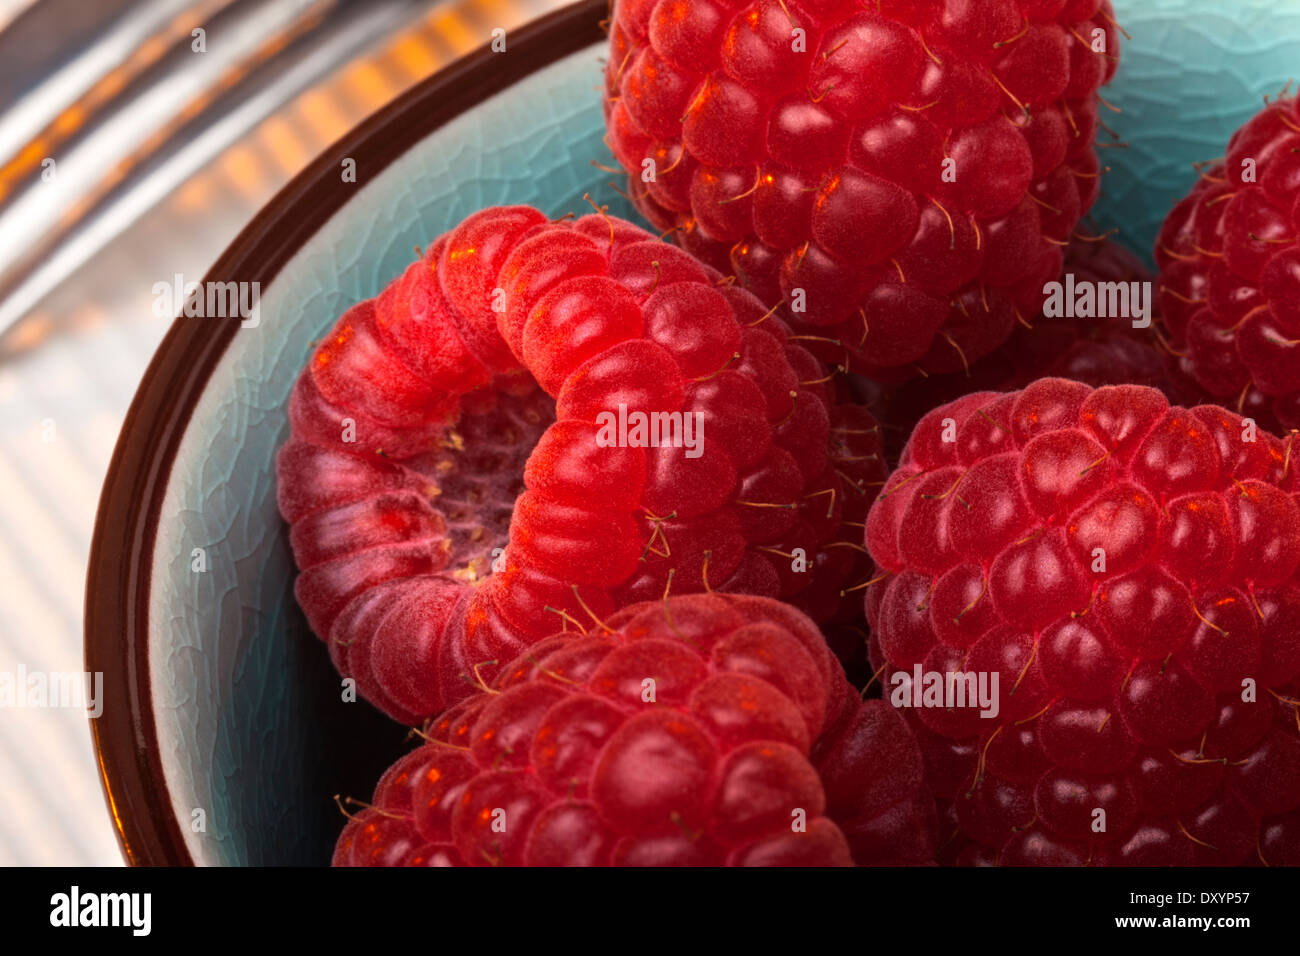 Raspberries are an edible soft fruit related to the blackberry, consisting of a cluster of reddish-pink drupelets. Stock Photo